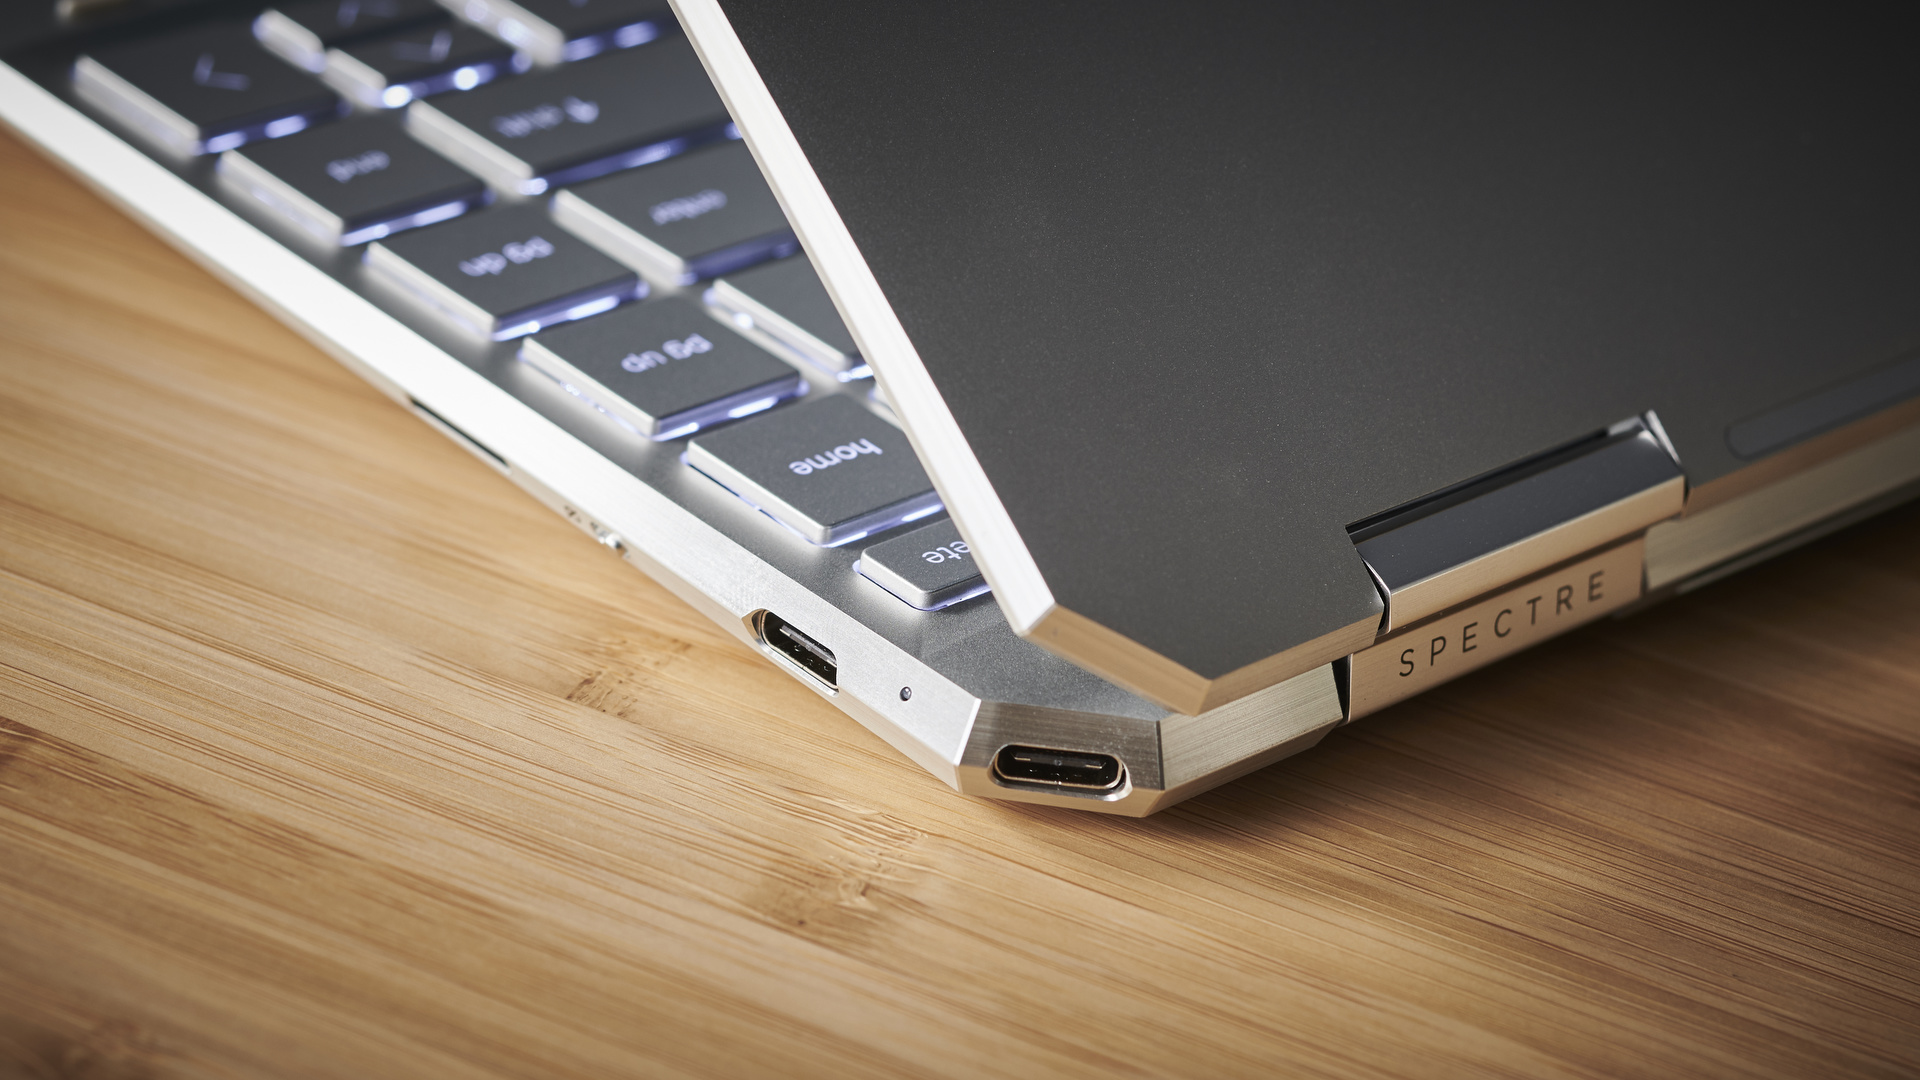 HP Spectre x360 (2021) on a wooden desk showing off its ports, its hinge, and part of its keyboard